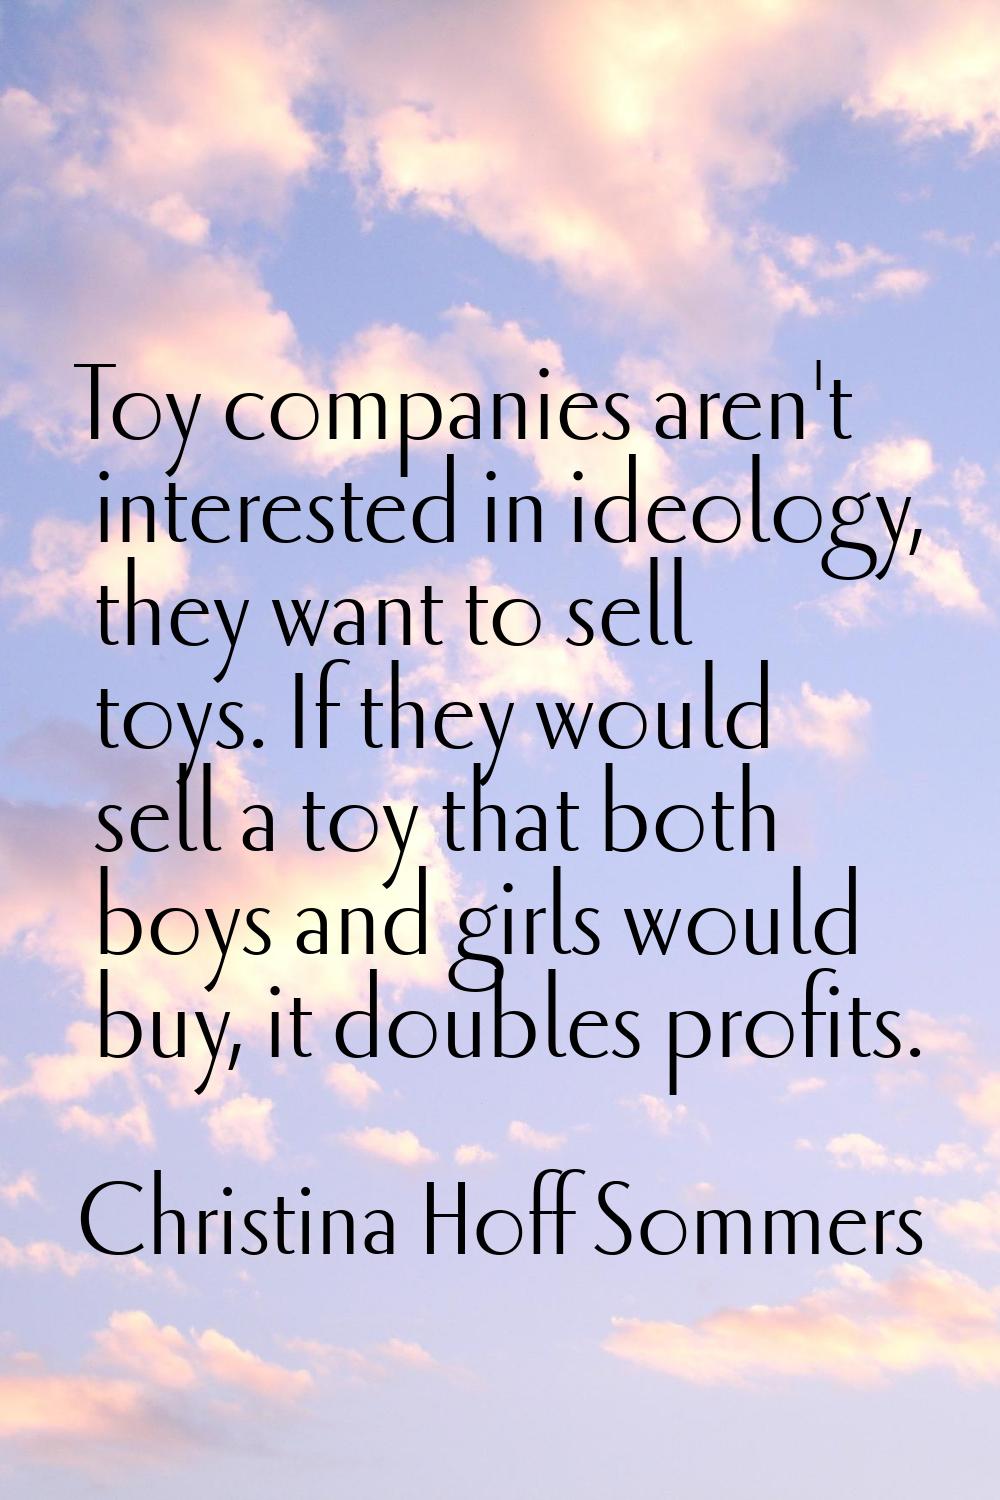 Toy companies aren't interested in ideology, they want to sell toys. If they would sell a toy that 